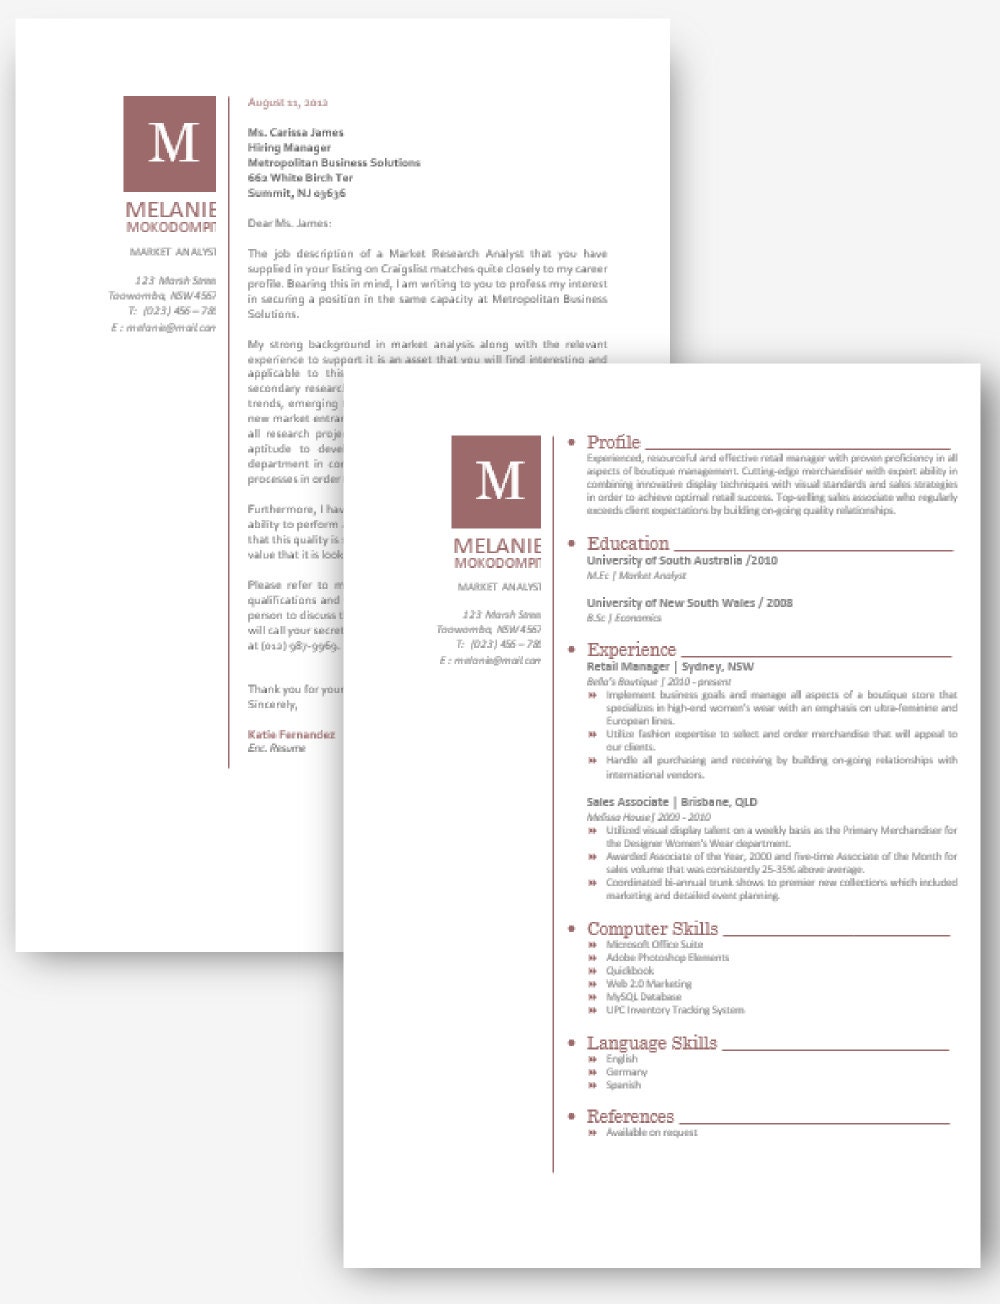 Coral Microsoft Word Resume and Cover Letter Template by ...